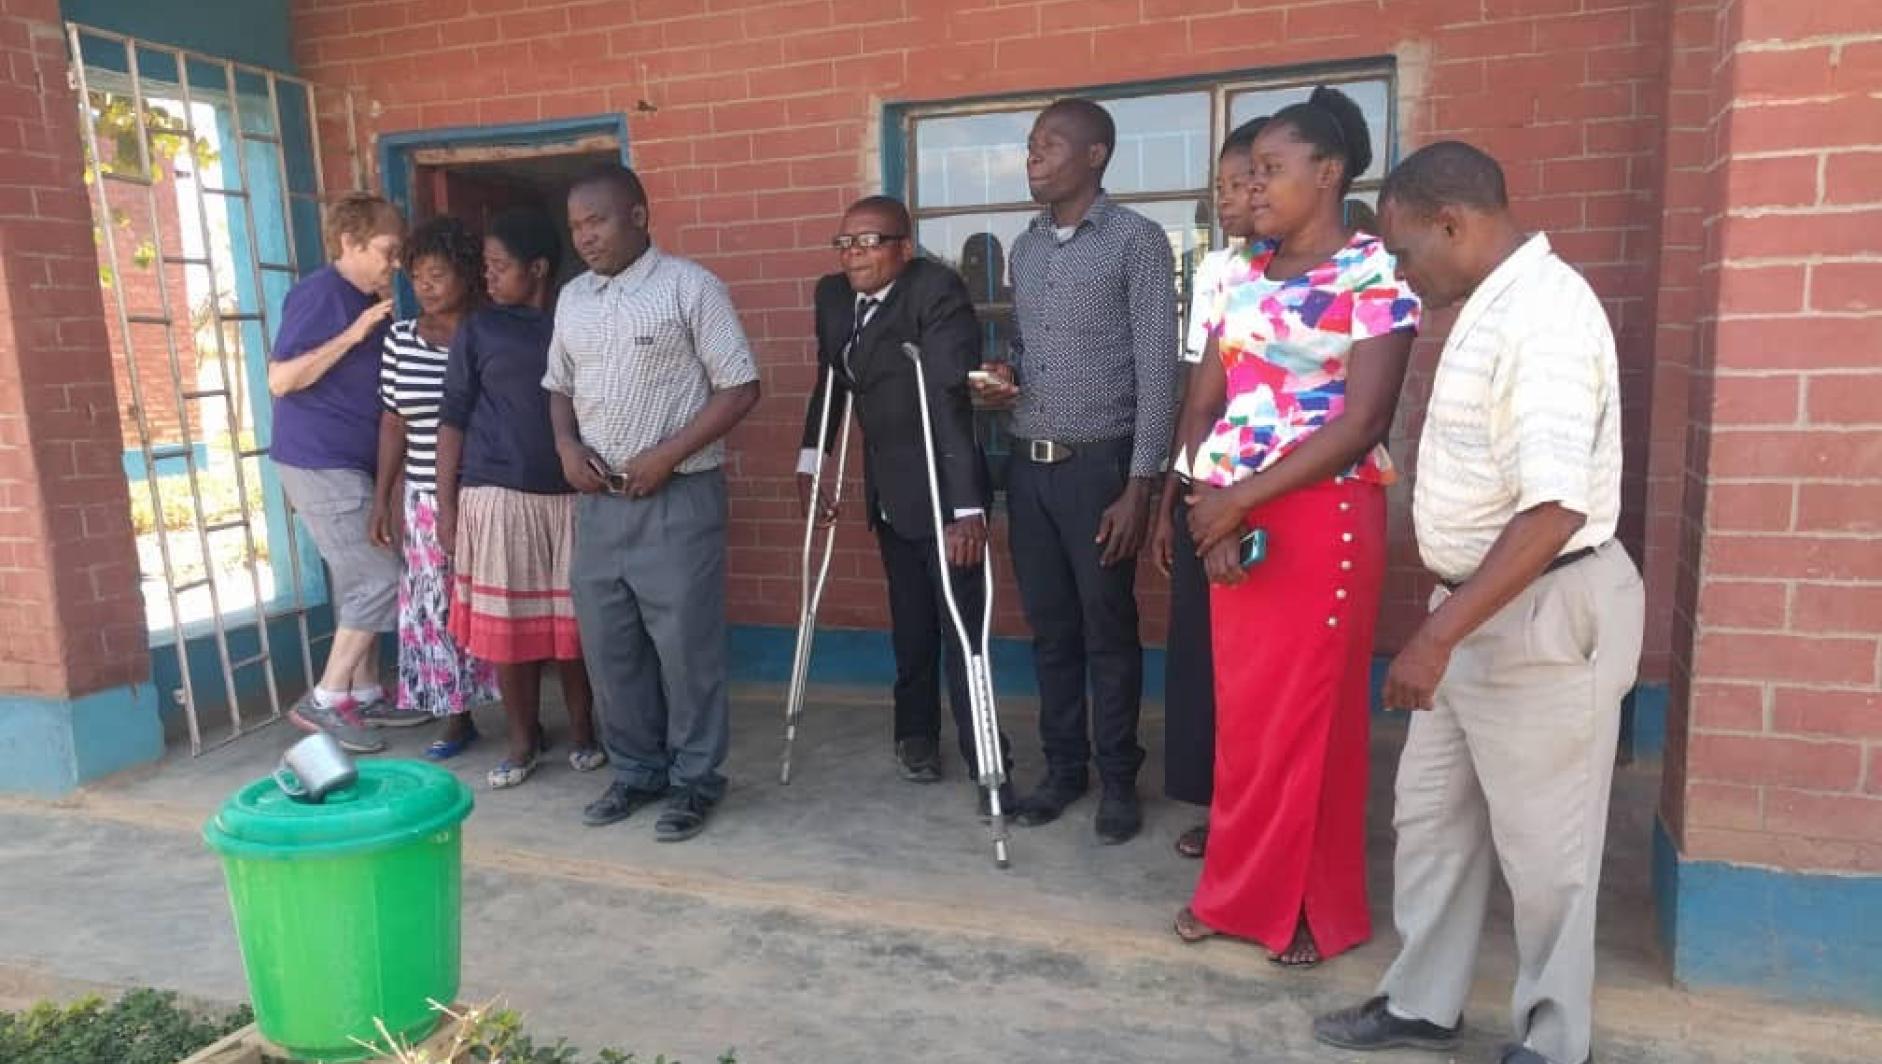 Staff with headmaster using the aluminum crutches we brought to him the summer before.